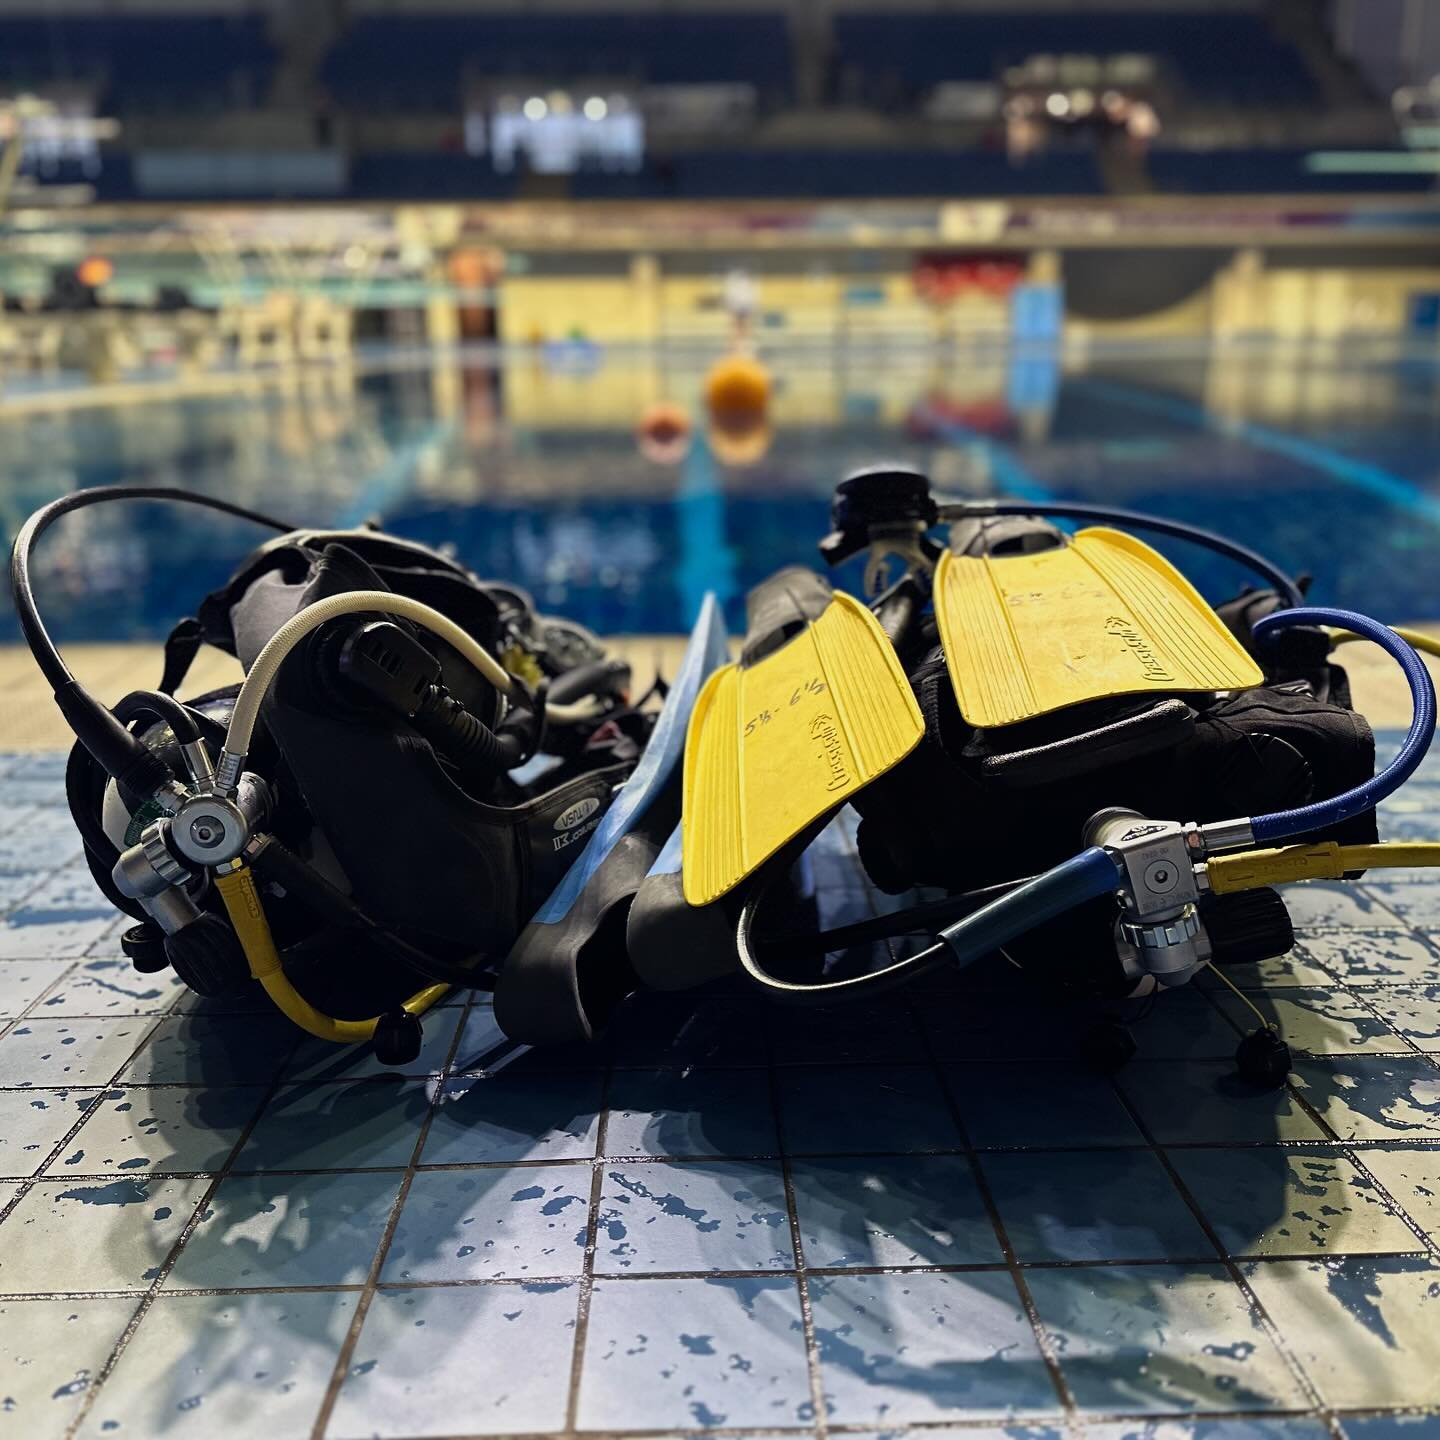 Dry-suit orientation tonight, with @diveworlduk at Ponds Forge. I was surprised to find we were sharing the dive pool with mermaids!

#SCUBA #PADI #DrySuitSpecialty